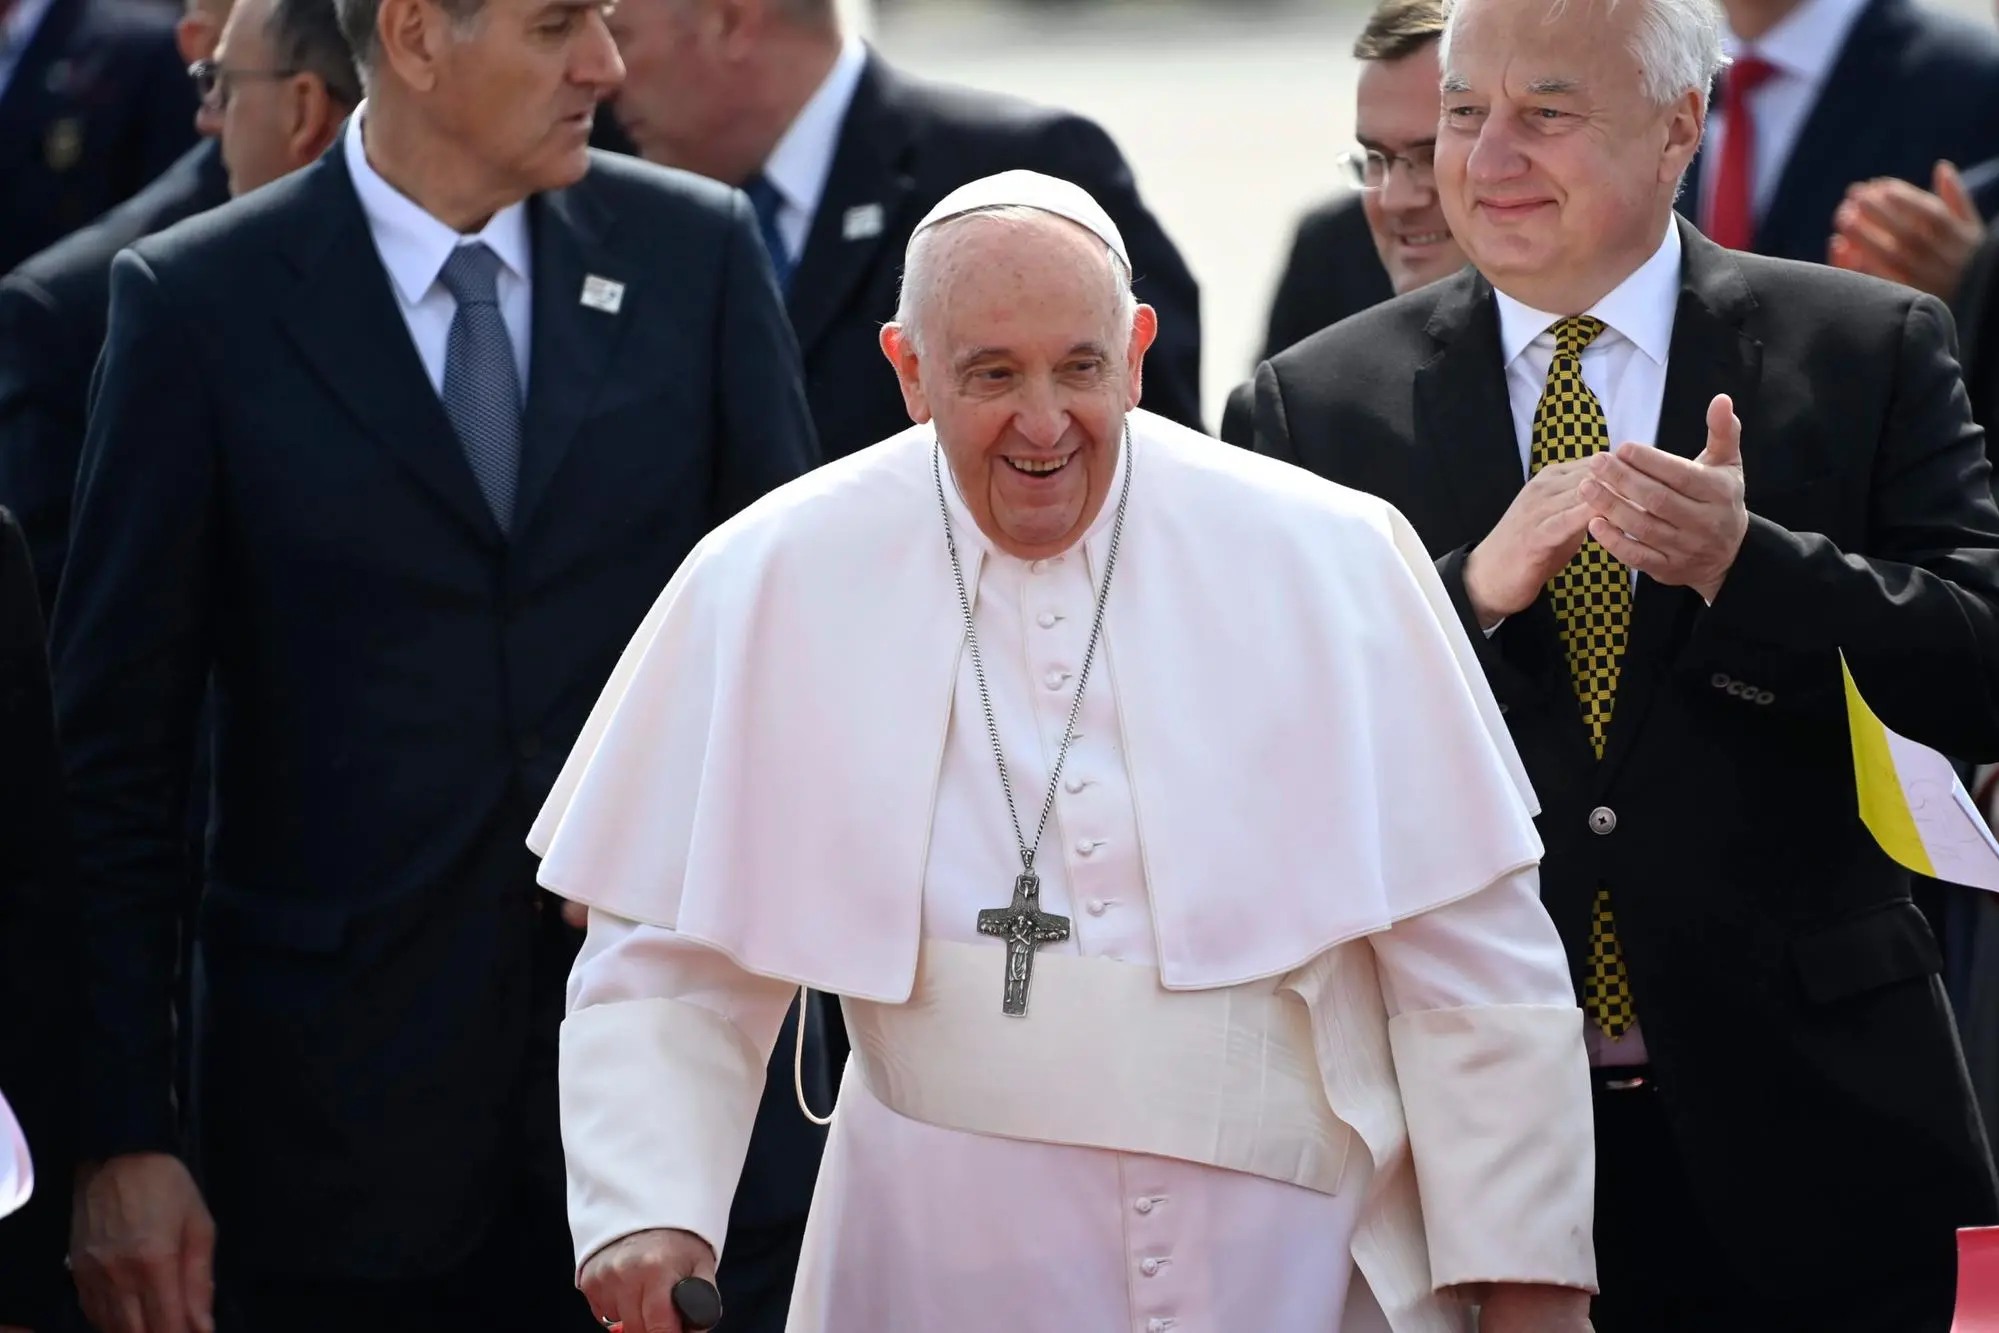 epa10596010 Pope Francis walks on the tarmac after landing as he arrives for his three-day Apostolic visit to Hungary, at Liszt Ferenc International Airport in Budapest, Hungary, 28 April 2023. EPA/TAMAS KOVACS HUNGARY OUT